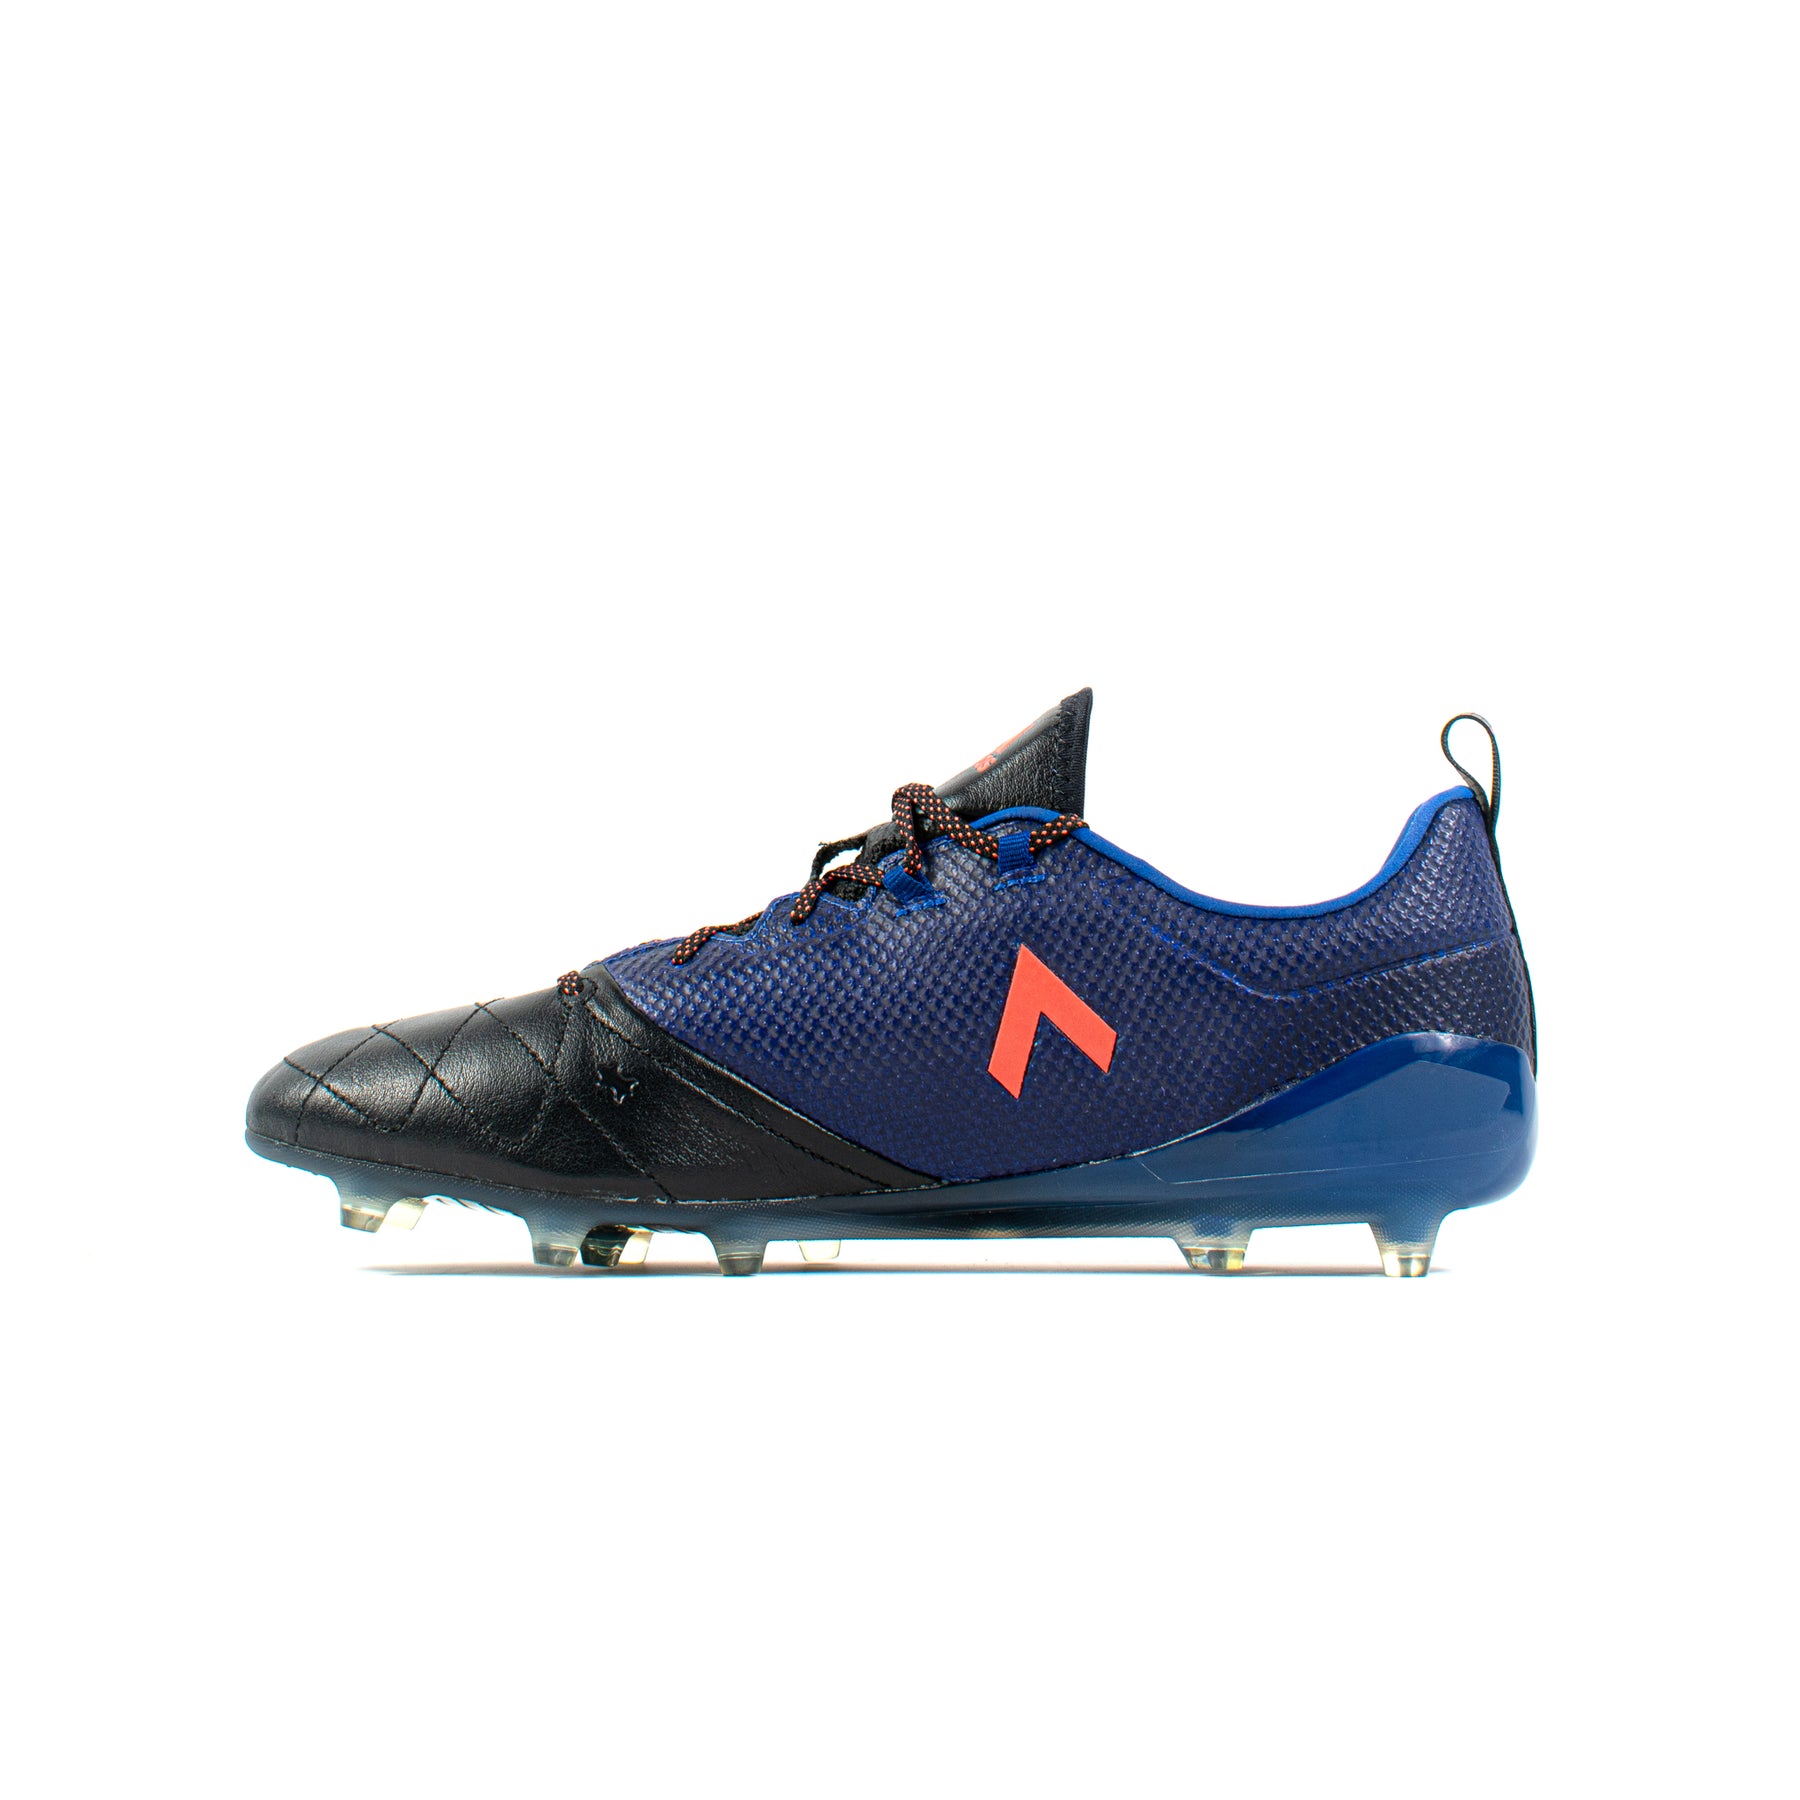 Anguila Noche queso Adidas Ace 17.1 Leather Black Blue FG – Classic Soccer Cleats